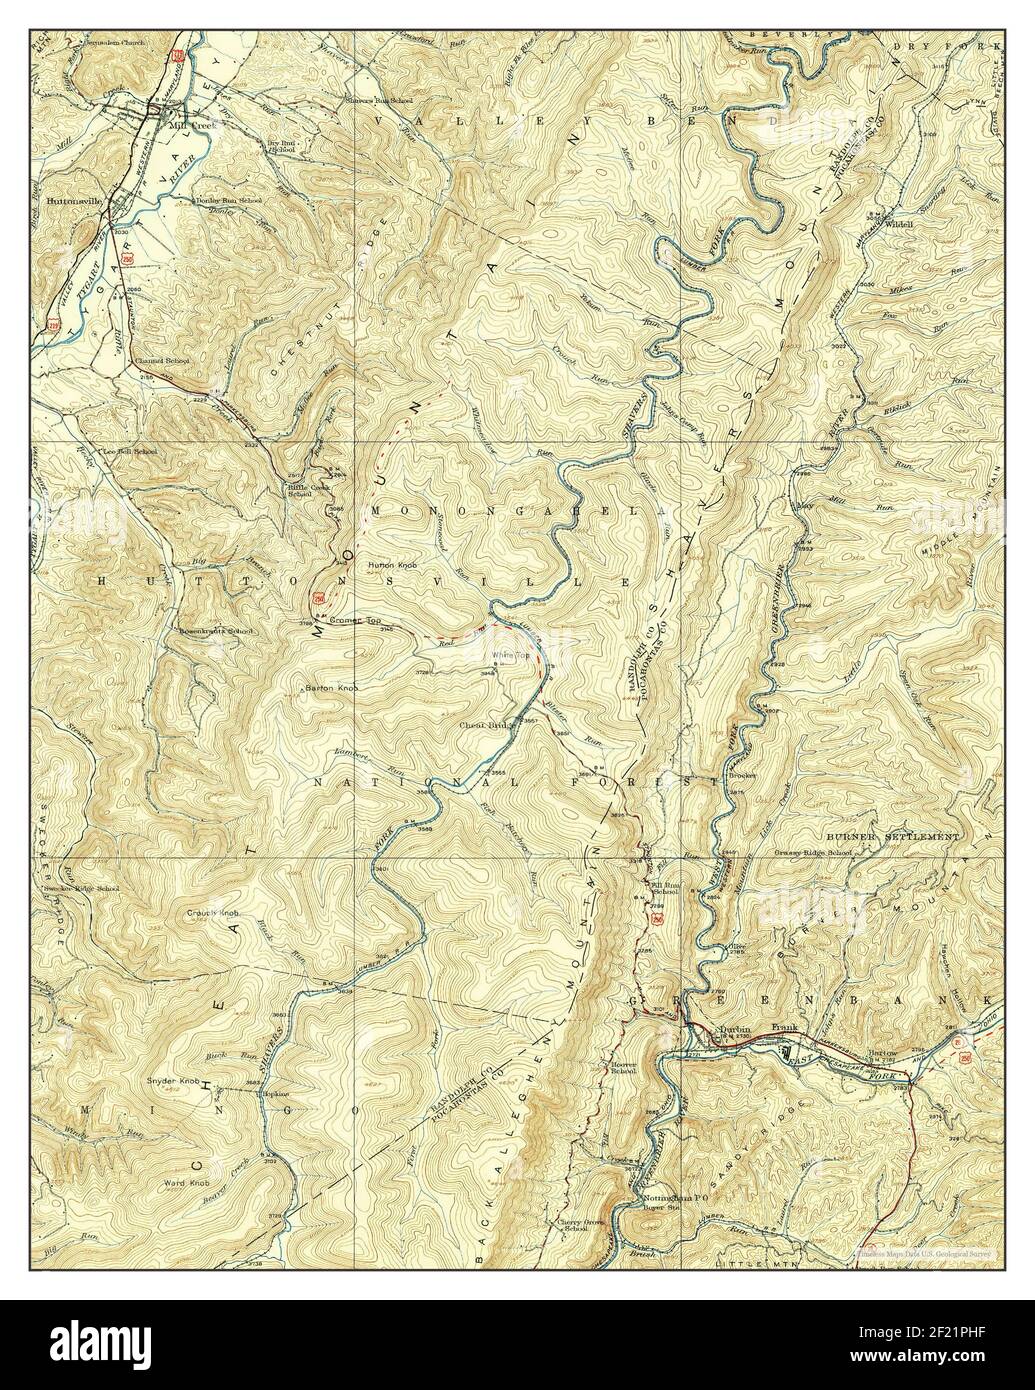 Durbin, West Virginia, map 1924, 1:62500, United States of America by Timeless Maps, data U.S. Geological Survey Stock Photo